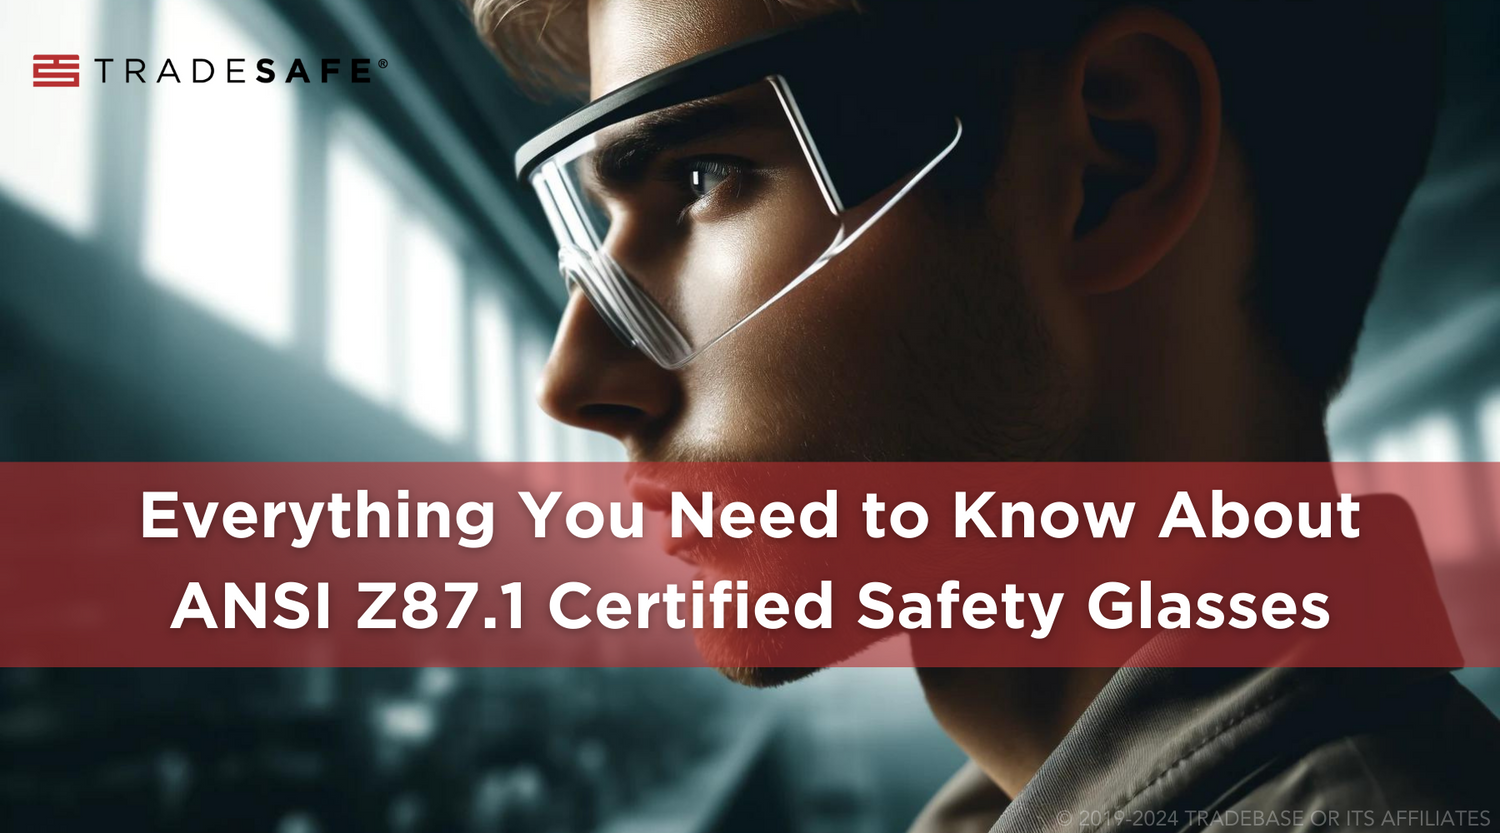 Why ANSI Z87.1 Certified Safety Glasses Matters | TRADESAFE